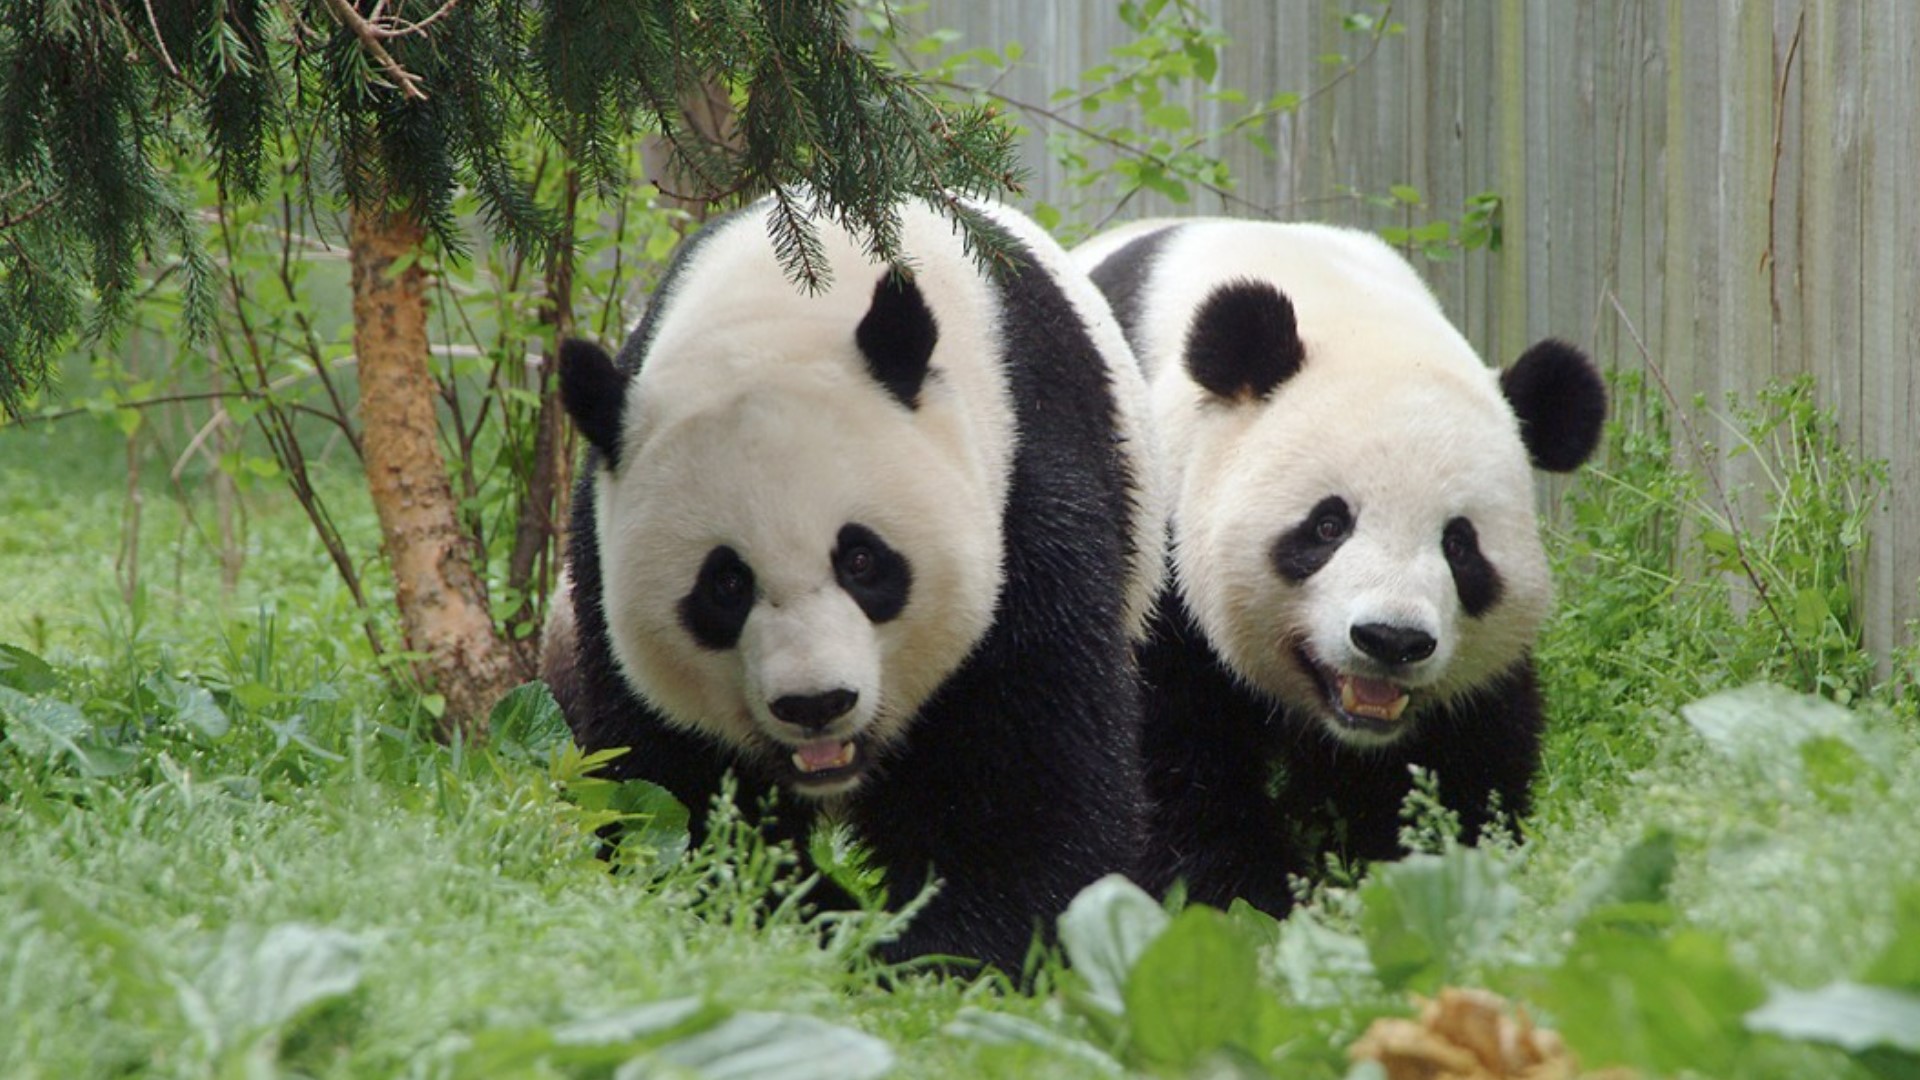 Take in the beauty of the Giant Pandas on their final full day at the National Zoo. The Pandas were transferred back to China the day after this recording